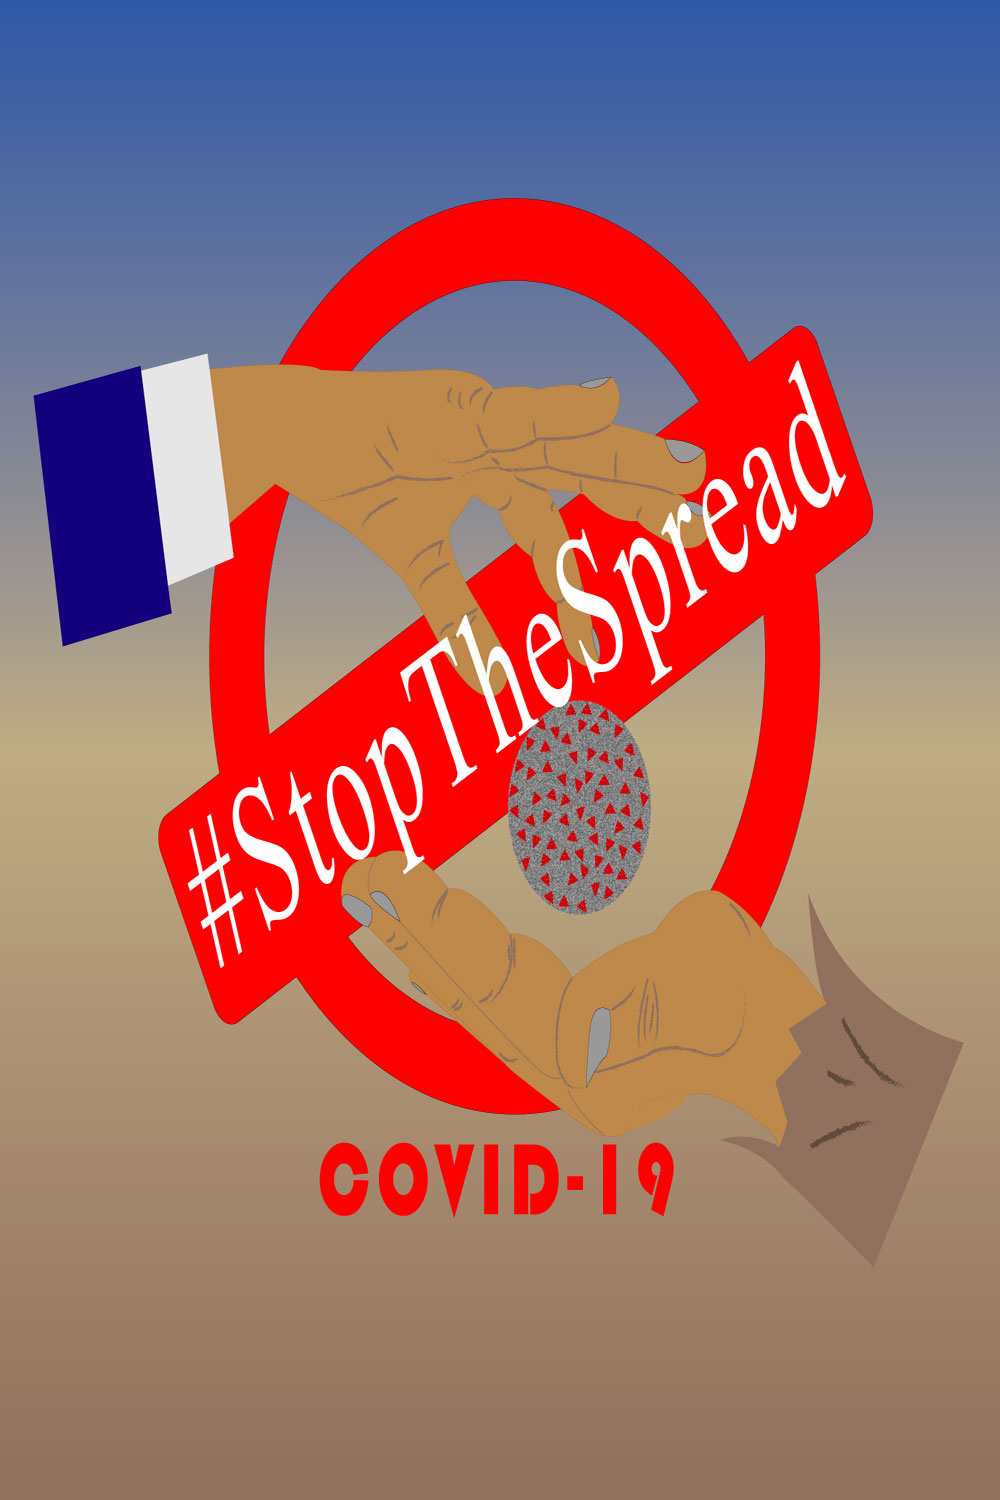 Stop the covid19 spread in poor pinterest preview image.